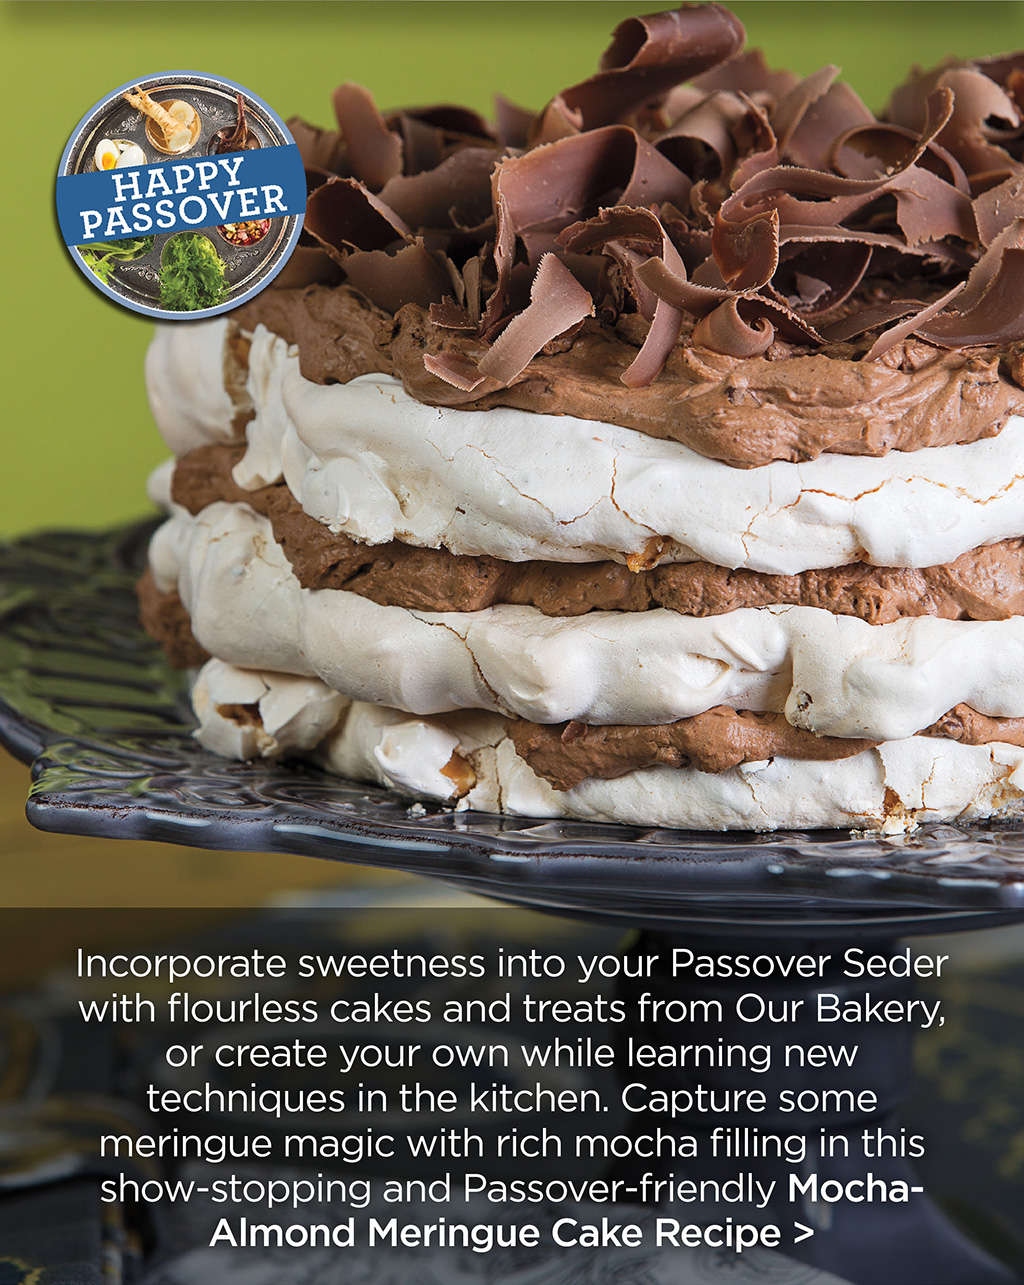 Happy Passover! Incorporate sweetness into your Passover Seder with flourless cakes and treats from Our Bakery, or create your own while learning new techniques in the kitchen. Capture some meringue magic with rich mocha filling in this show-stopping and Passover-friendly Mocha-Almond Meringue Cake Recipe >